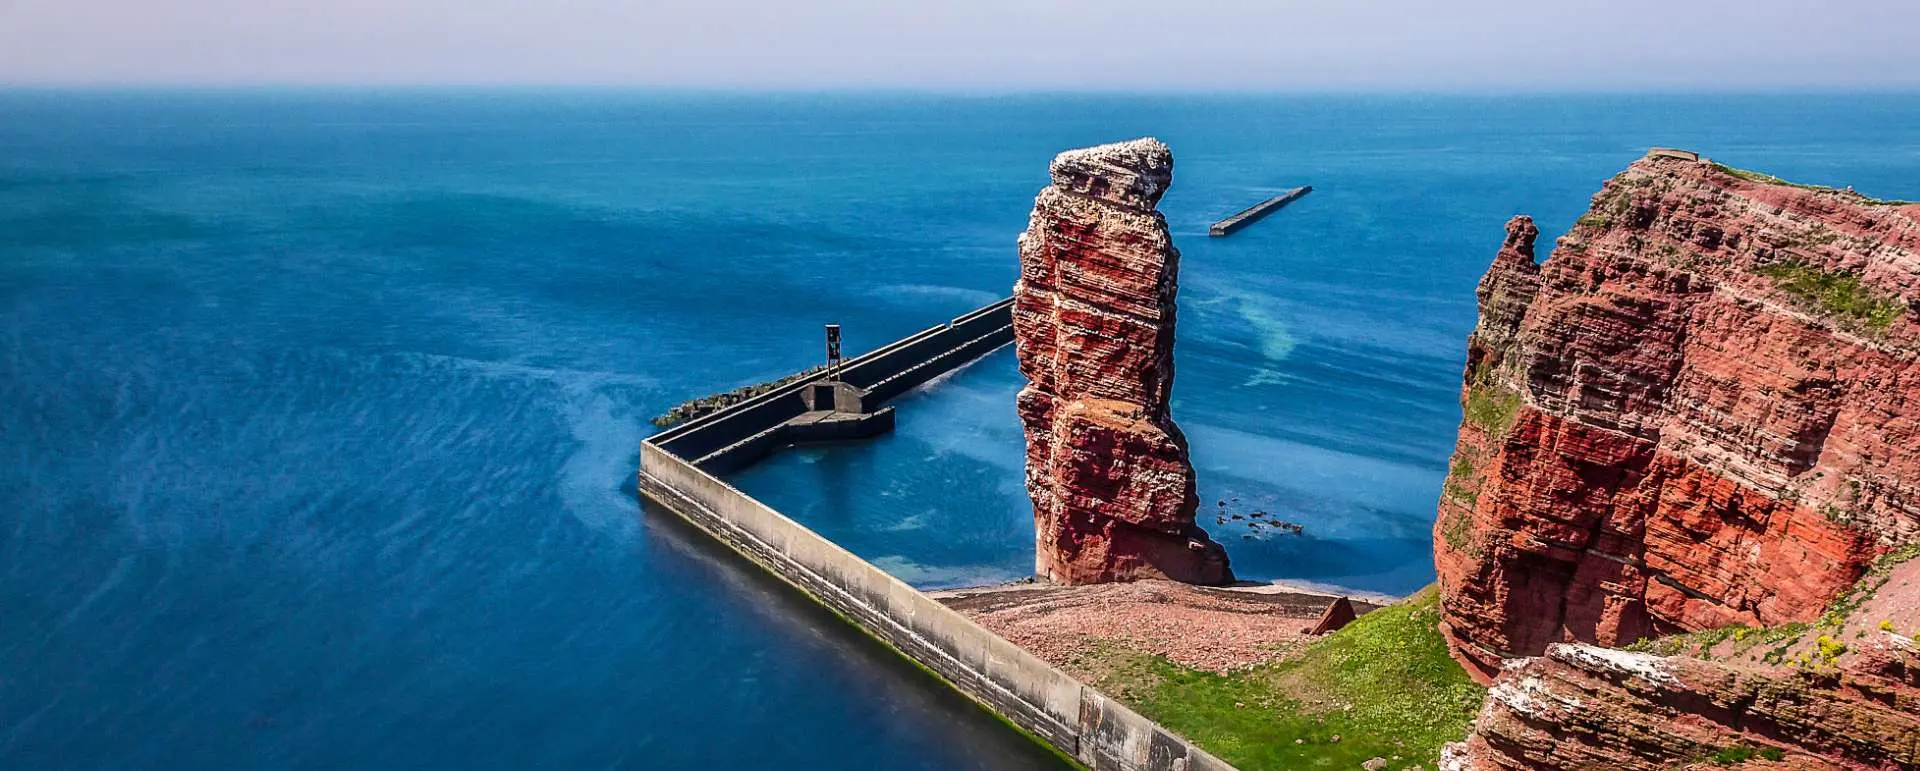 Heligoland - the destination for group events